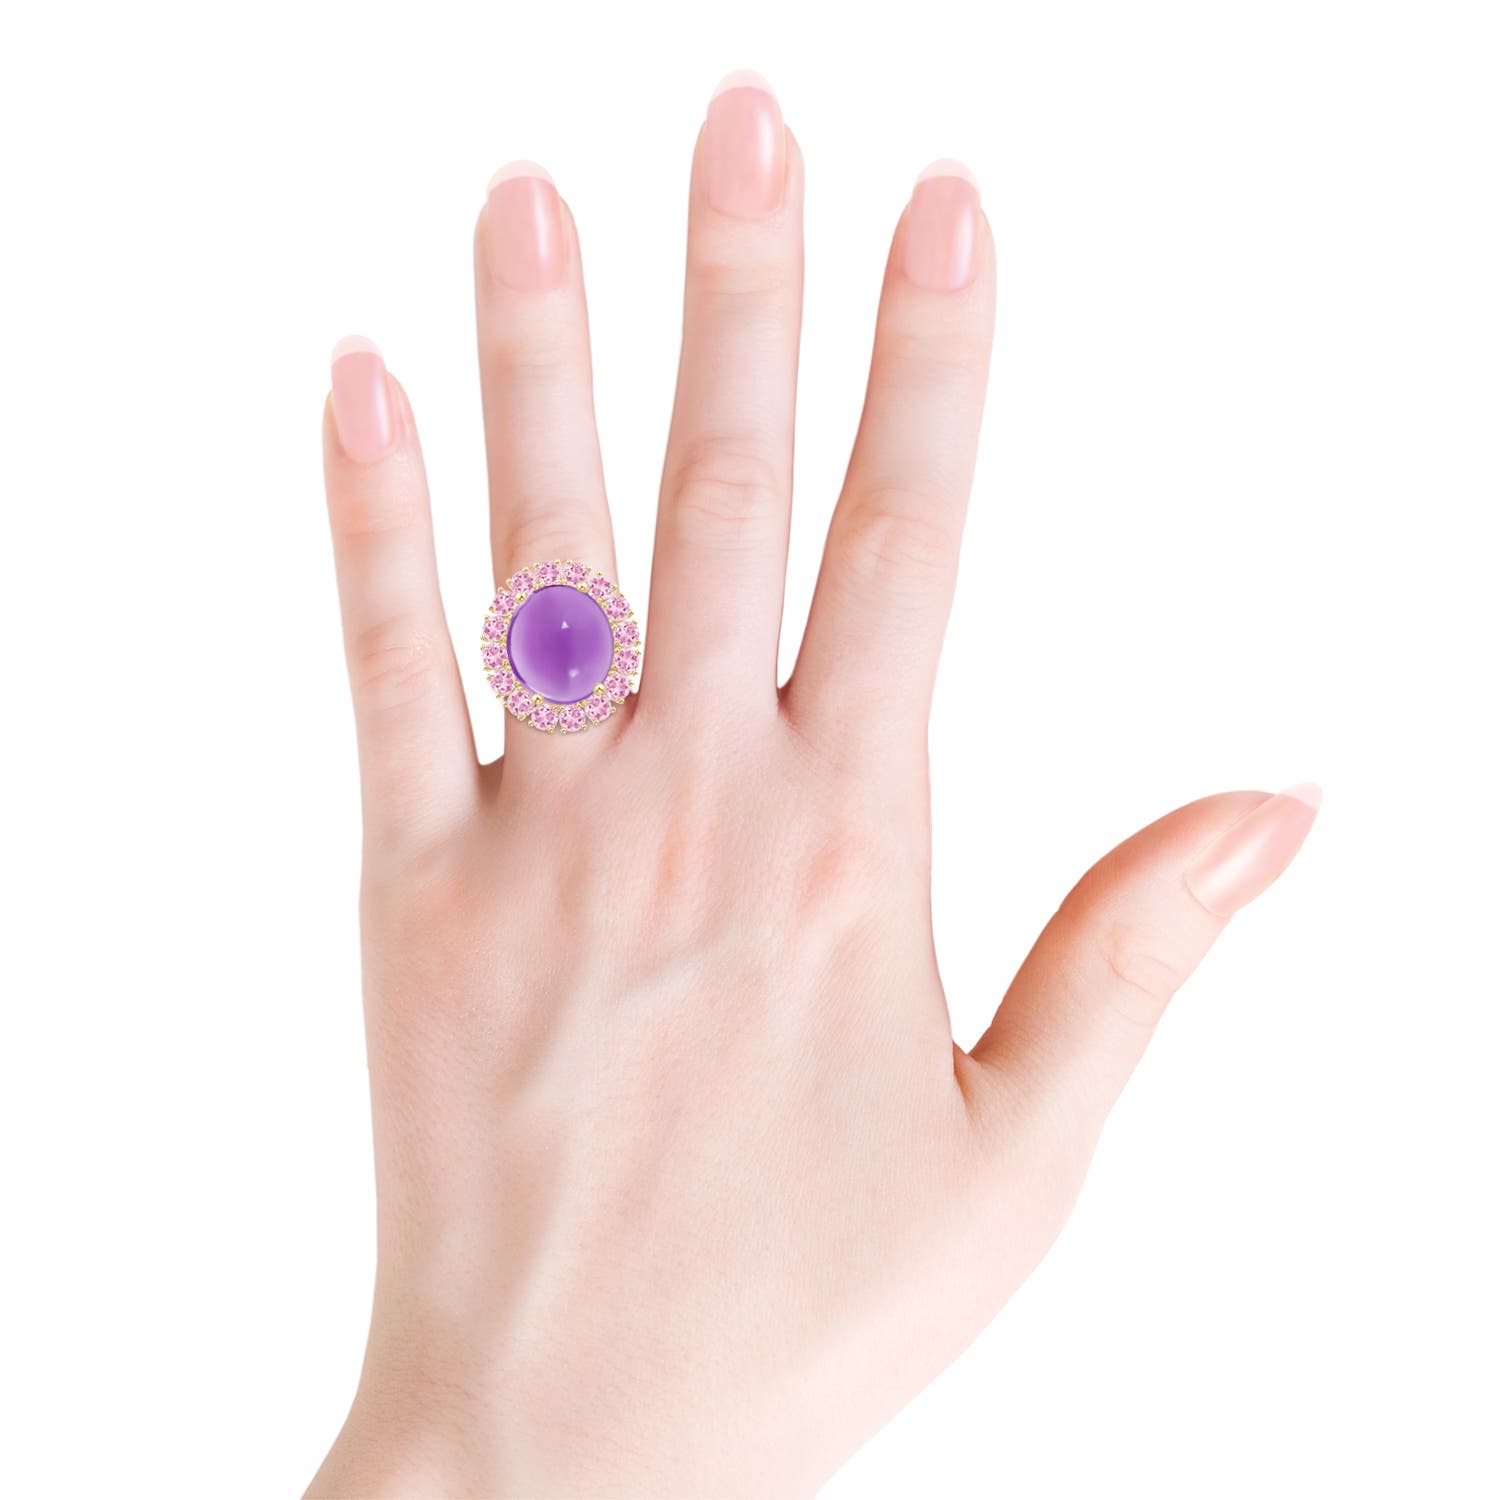 A - Amethyst / 13.56 CT / 14 KT Yellow Gold